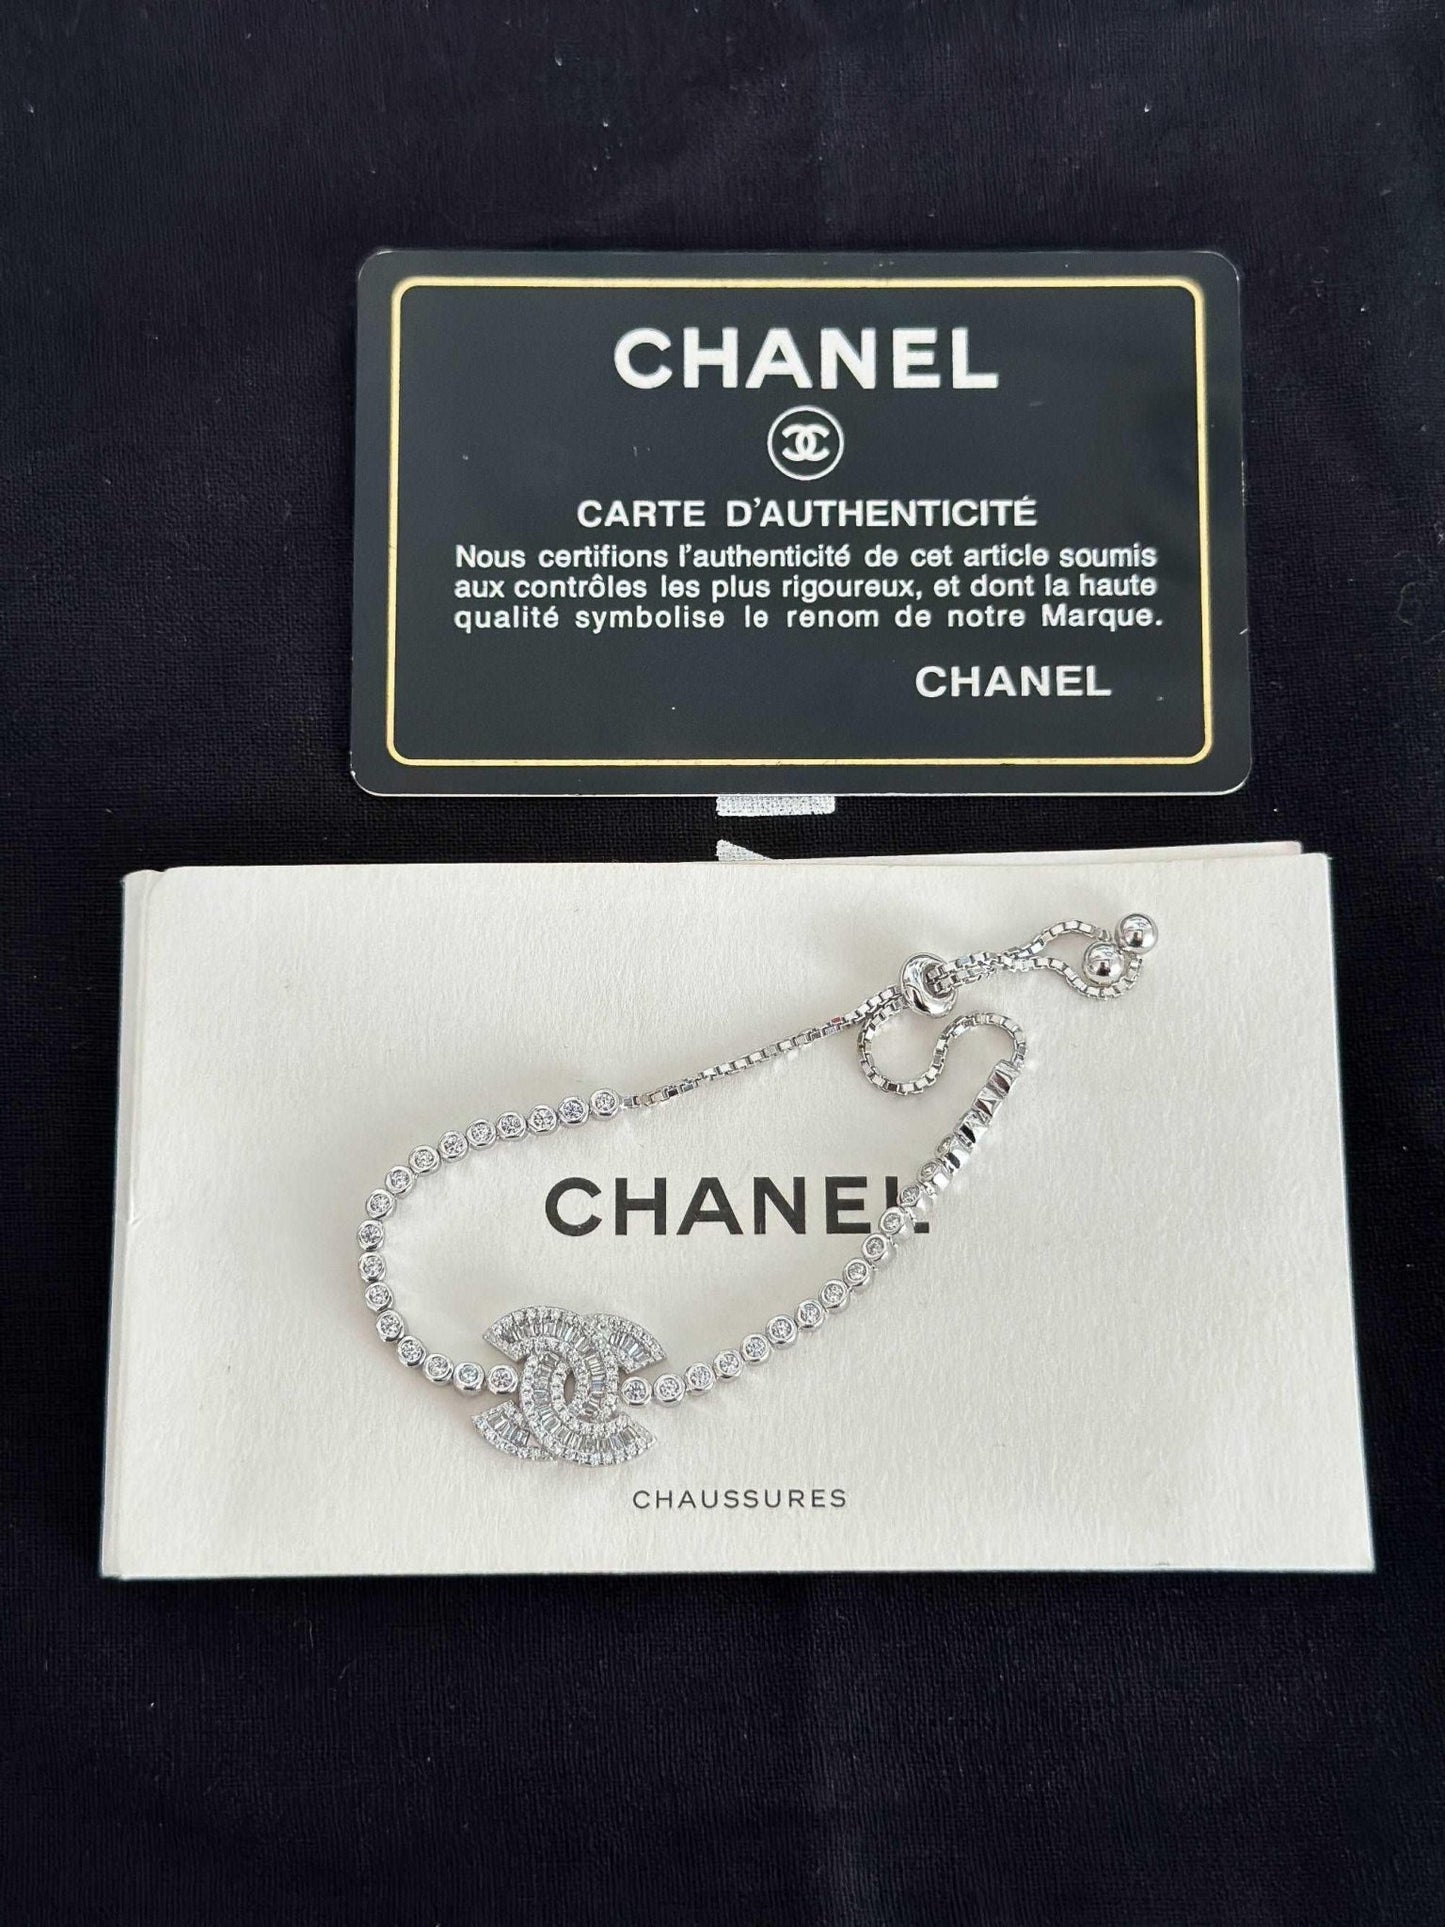 Exquisite 925 Sterling Silver Chanel Bracelet with Brilliant White Zircon Stone - Timeless Elegance - Tracesilver